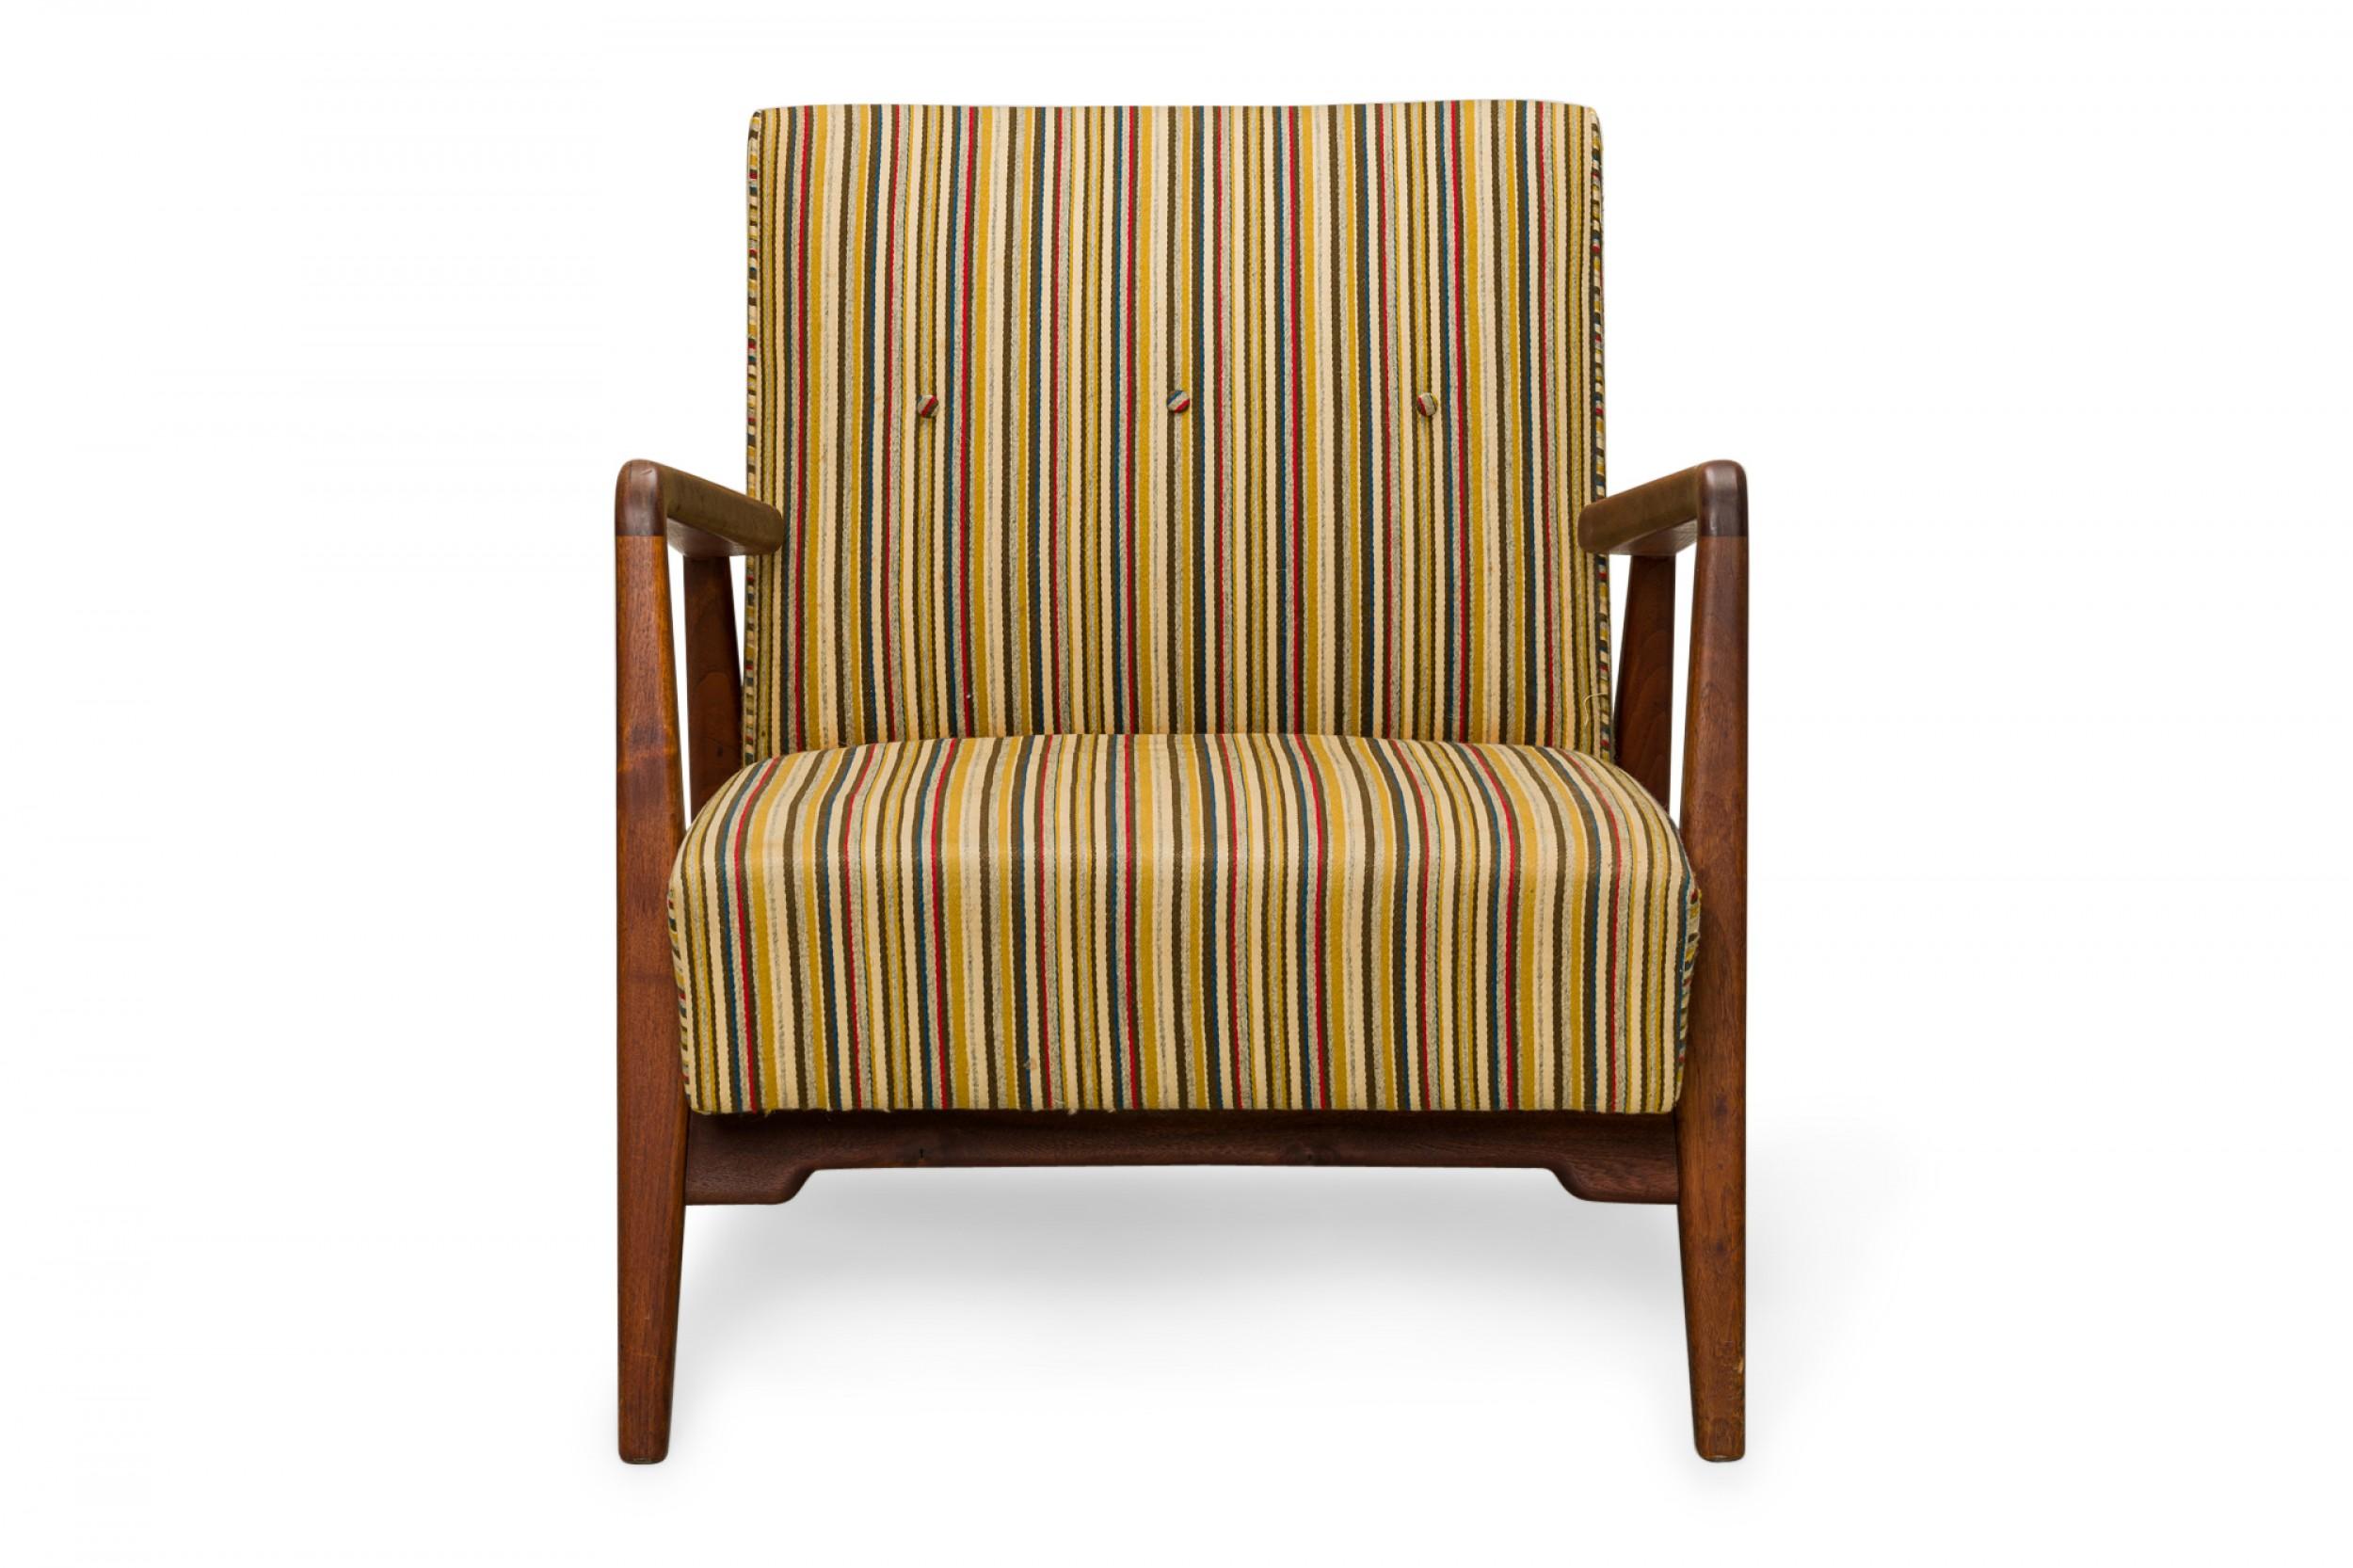 Danish mid-century lounge armchair with a shaped teak frame with two wooden armrests, and seat and back cushions upholstered in a blue, gold, red, and beige striped fabric, resting on four rounded tapered legs. (JENS RISOM)
 